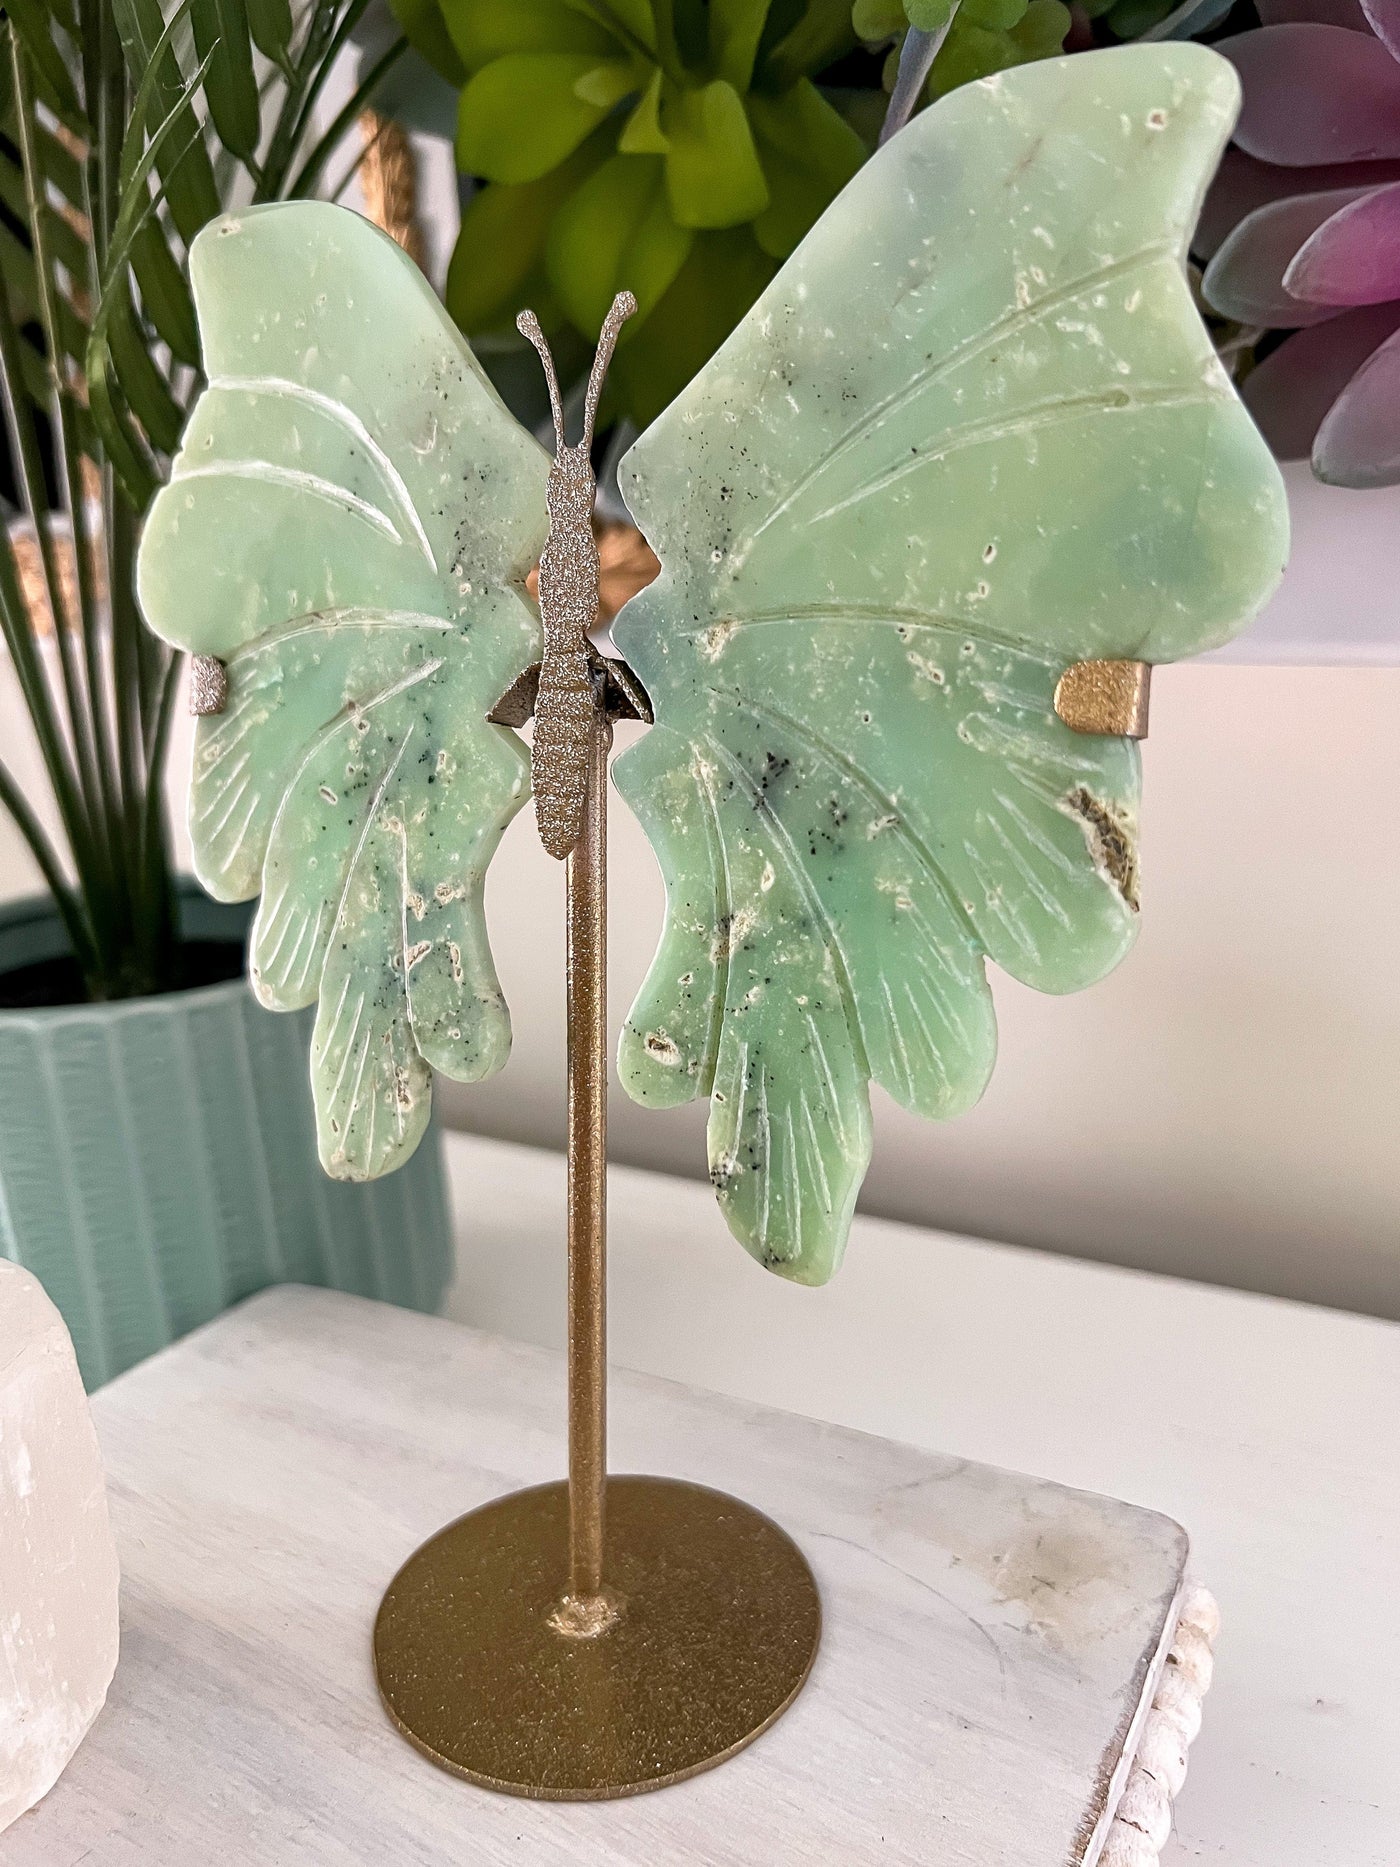 CHRYSOPRASE BUTTERFLY WINGS ON SHIMMERY STAND Revive In Style Vintage Furniture Painted Refinished Redesign Beautiful One of a Kind Artistic Antique Unique Home Decor Interior Design French Country Shabby Chic Cottage Farmhouse Grandmillenial Coastal Chalk Paint Metallic Glam Eclectic Quality Dovetailed Rustic Furniture Painter Pinterest Bedroom Living Room Entryway Kitchen Home Trends House Styles Decorating ideas